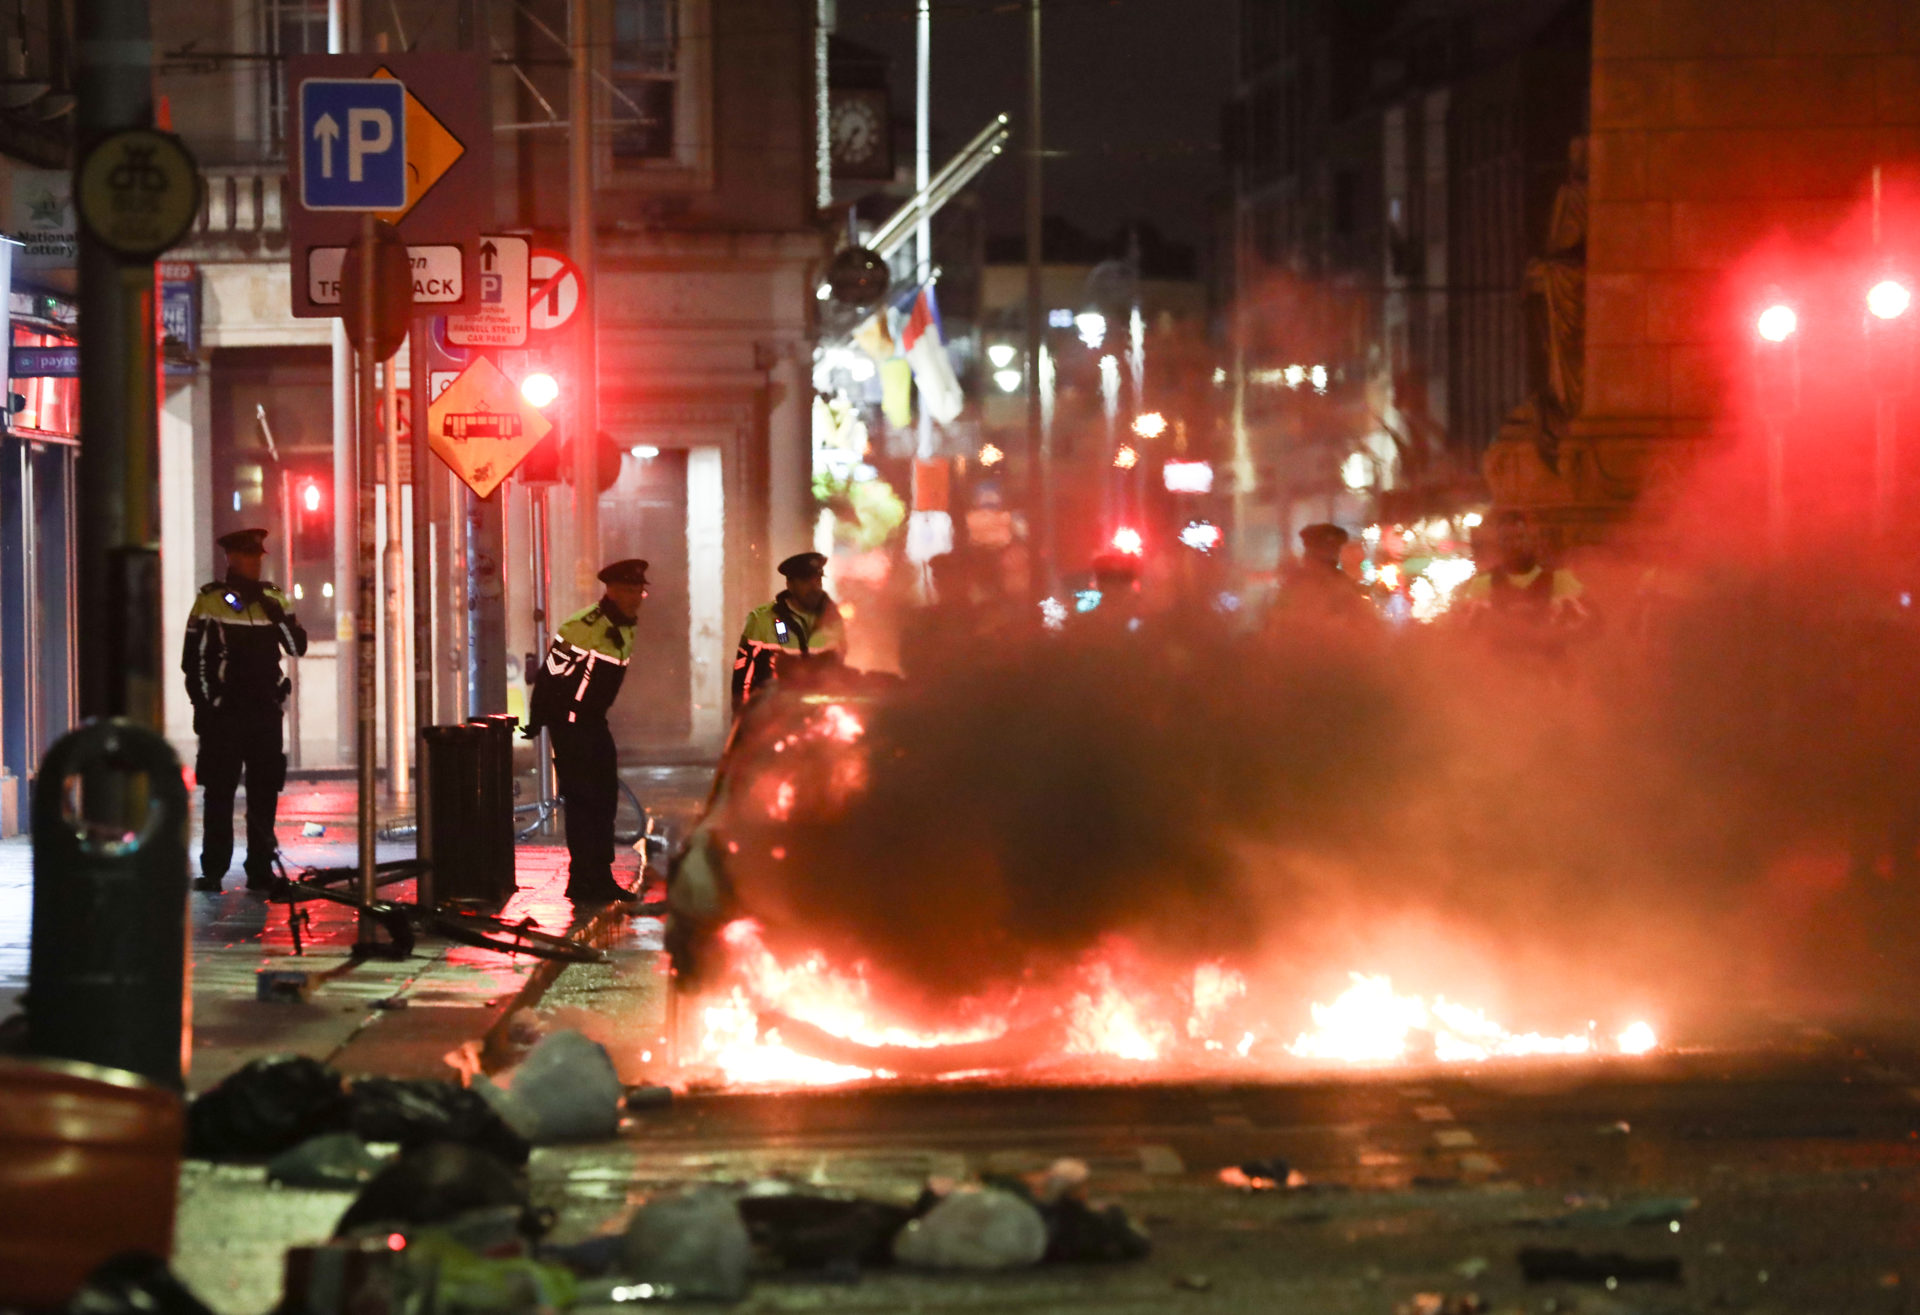 A car burns on Parnell Street as rioters cause chaos in Dublin city centre